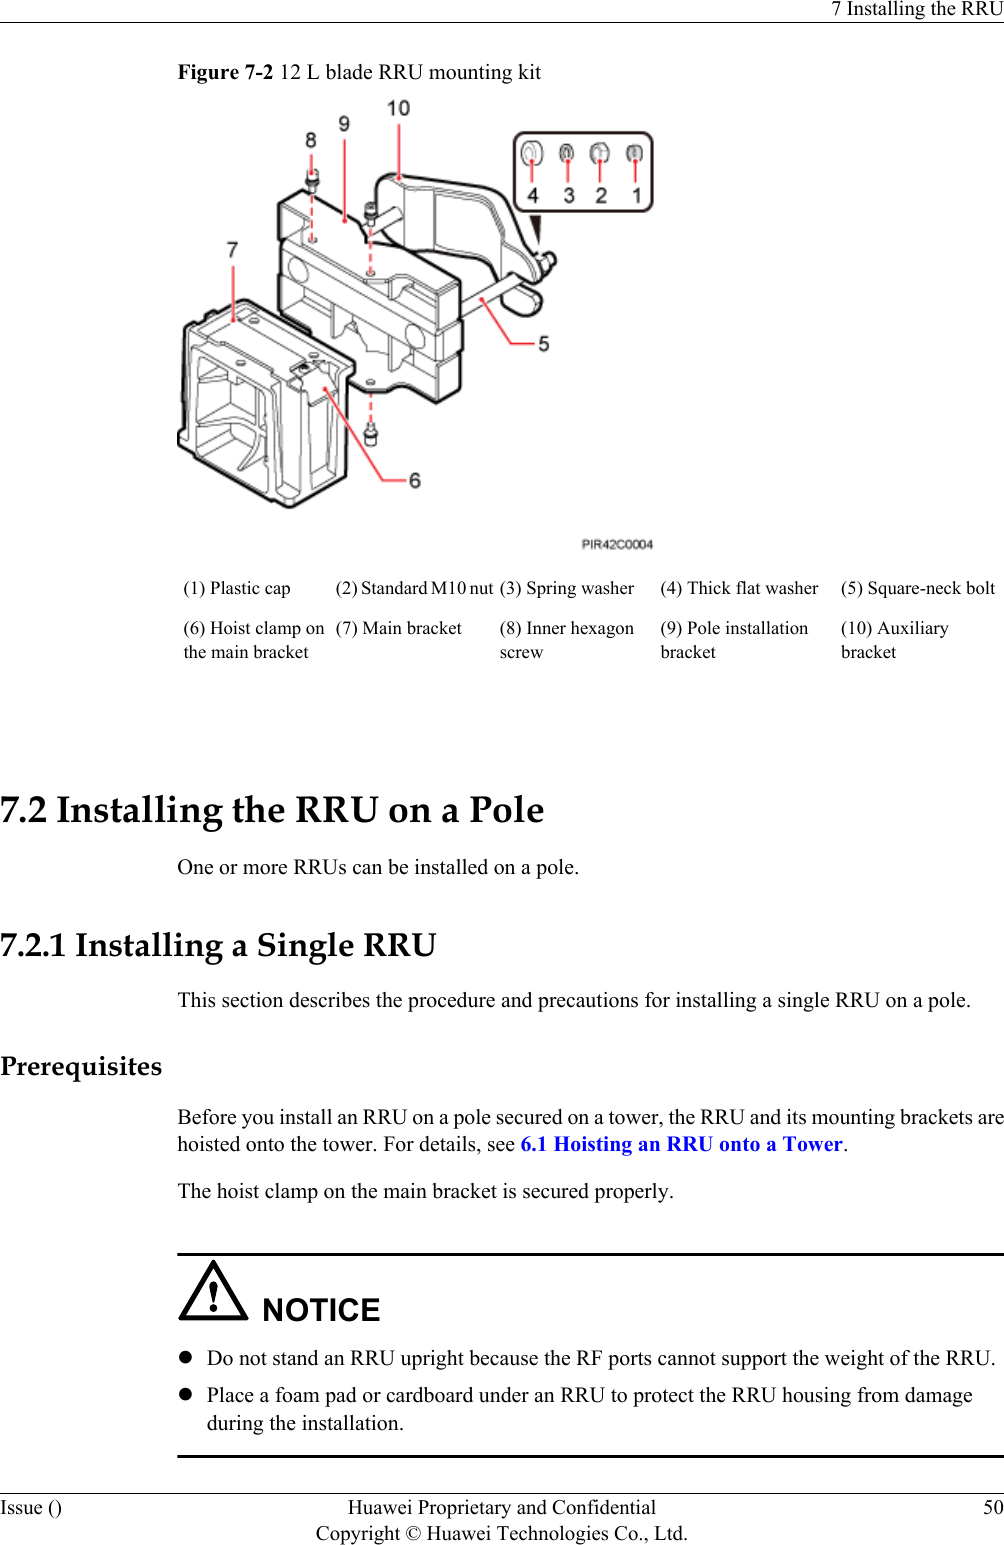 Figure 7-2 12 L blade RRU mounting kit(1) Plastic cap (2) Standard M10 nut (3) Spring washer (4) Thick flat washer (5) Square-neck bolt(6) Hoist clamp onthe main bracket(7) Main bracket (8) Inner hexagonscrew(9) Pole installationbracket(10) Auxiliarybracket 7.2 Installing the RRU on a PoleOne or more RRUs can be installed on a pole.7.2.1 Installing a Single RRUThis section describes the procedure and precautions for installing a single RRU on a pole.PrerequisitesBefore you install an RRU on a pole secured on a tower, the RRU and its mounting brackets arehoisted onto the tower. For details, see 6.1 Hoisting an RRU onto a Tower.The hoist clamp on the main bracket is secured properly.NOTICElDo not stand an RRU upright because the RF ports cannot support the weight of the RRU.lPlace a foam pad or cardboard under an RRU to protect the RRU housing from damageduring the installation.7 Installing the RRUIssue () Huawei Proprietary and ConfidentialCopyright © Huawei Technologies Co., Ltd.50